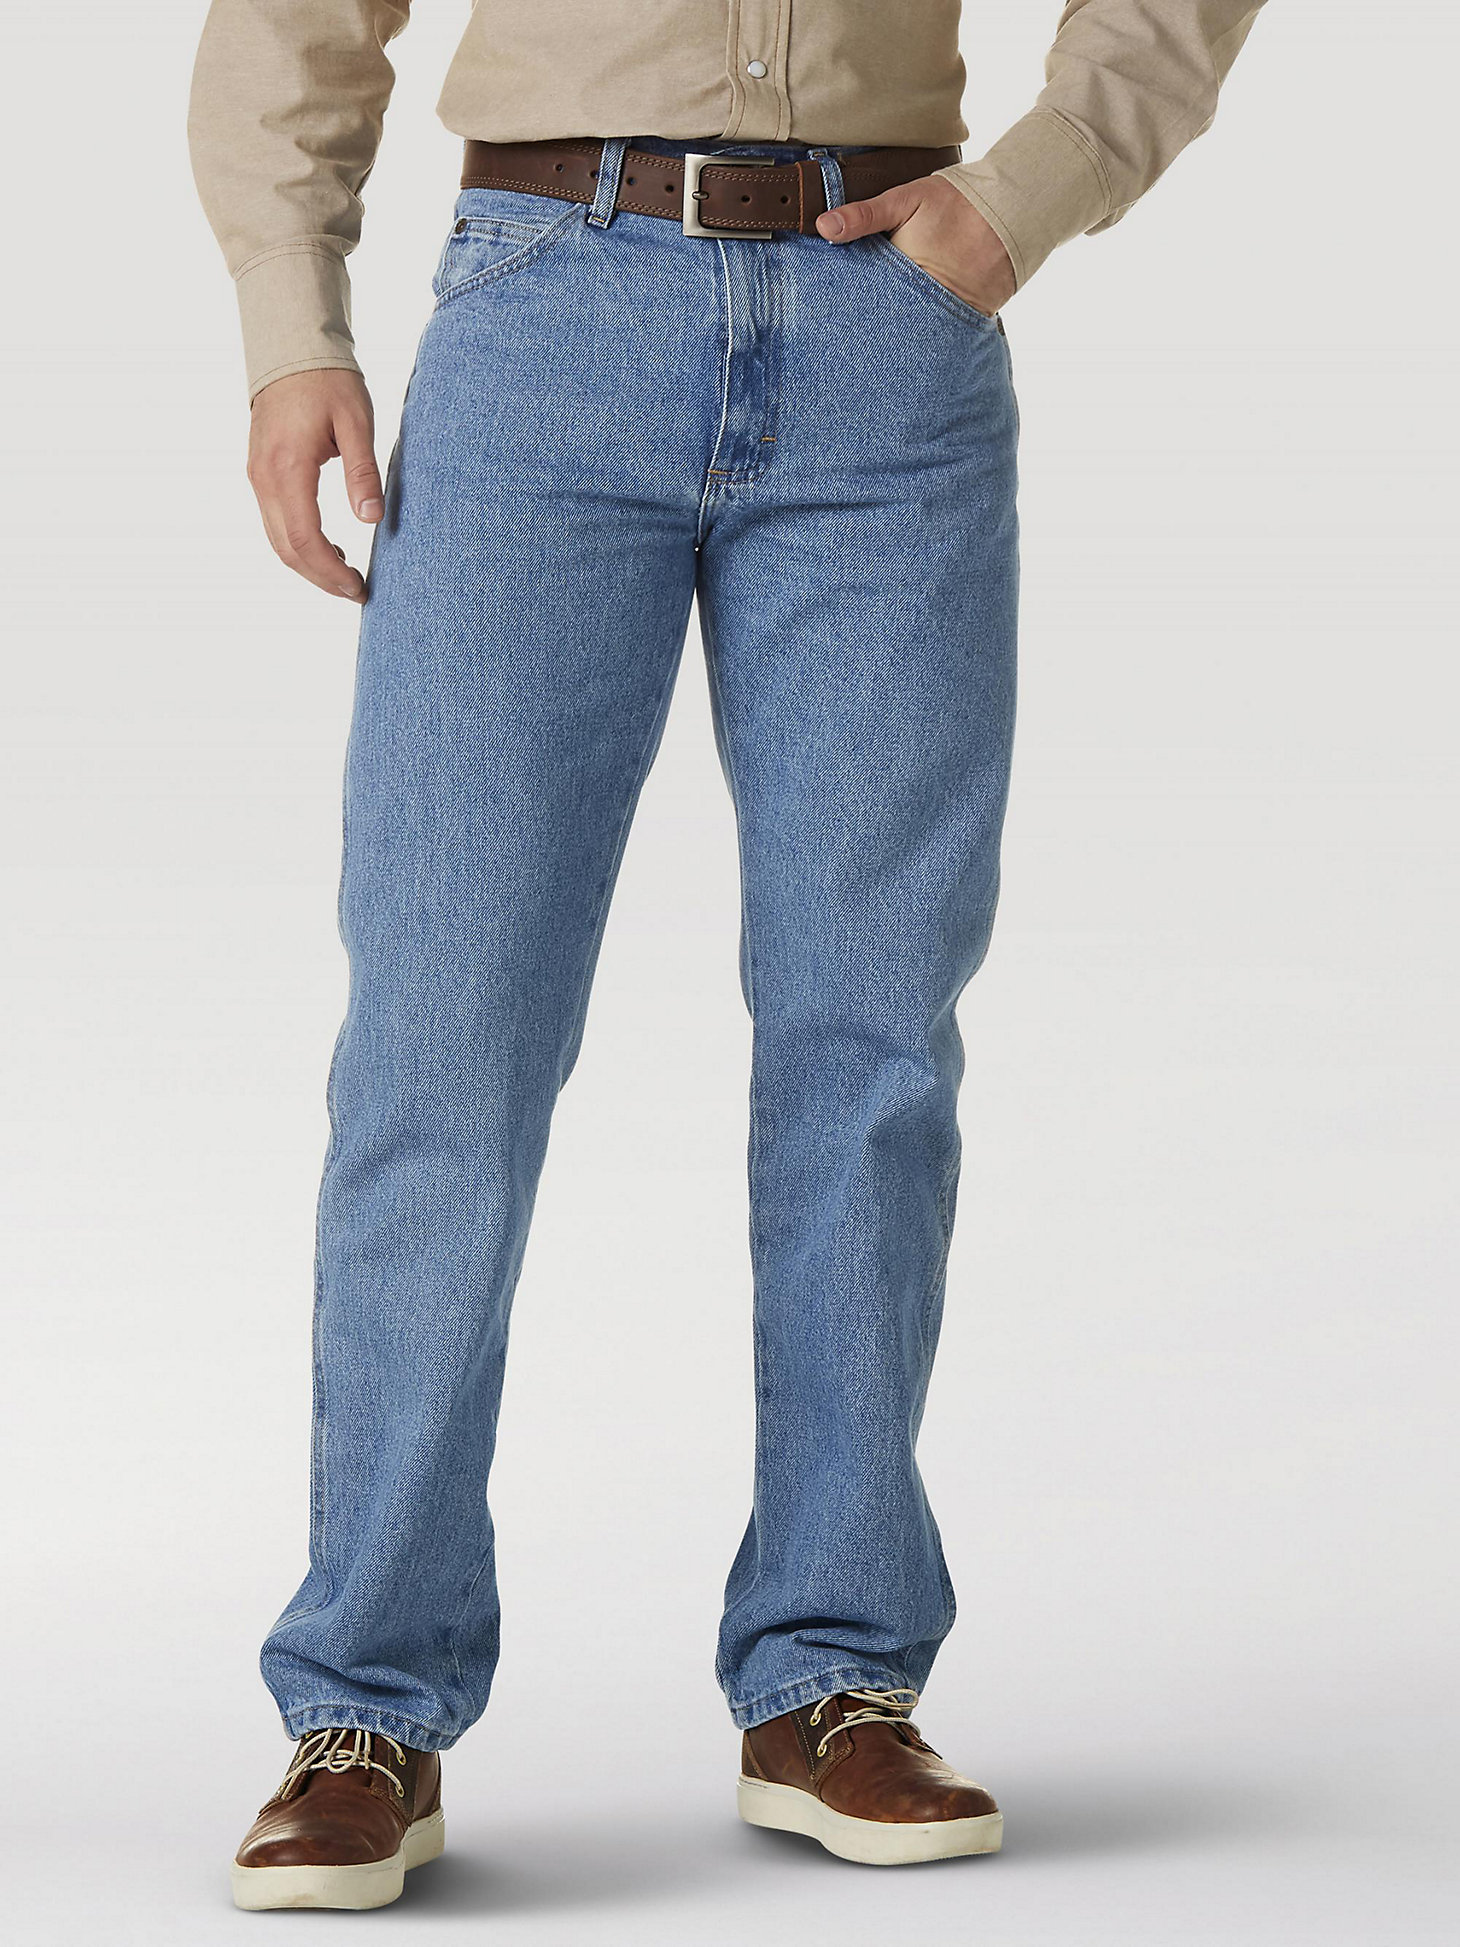 Ewell flood Not enough Wrangler Rugged Wear® Classic Fit Jean